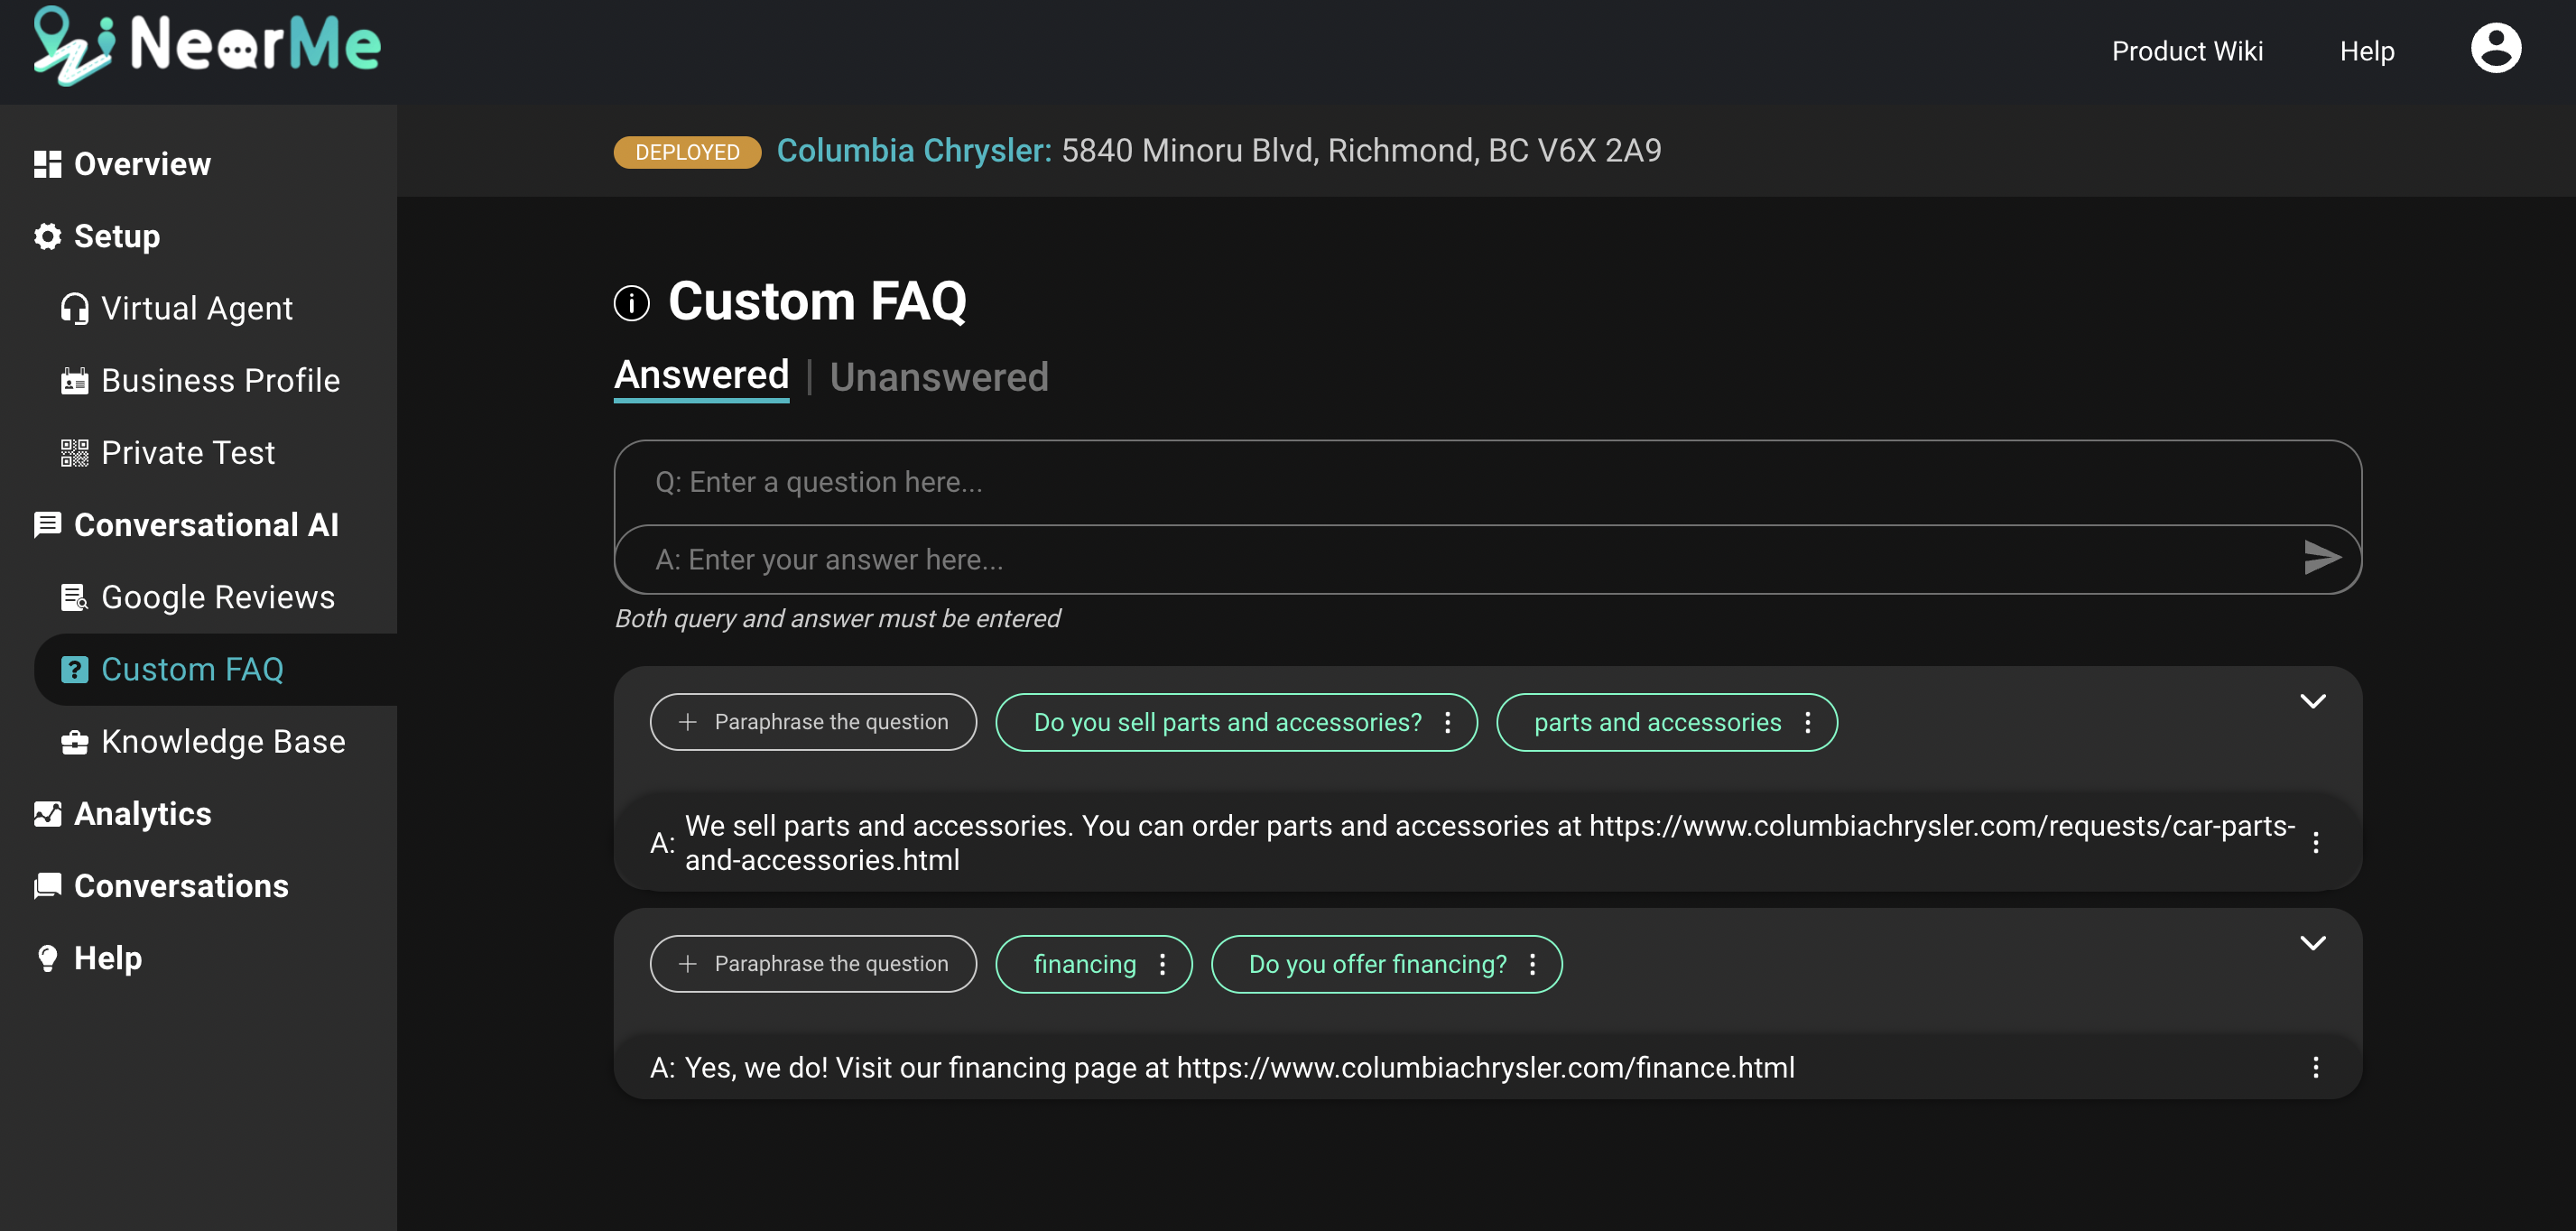 Near Me Messaging provides a custom FAQ feature to personalize the virtual agent